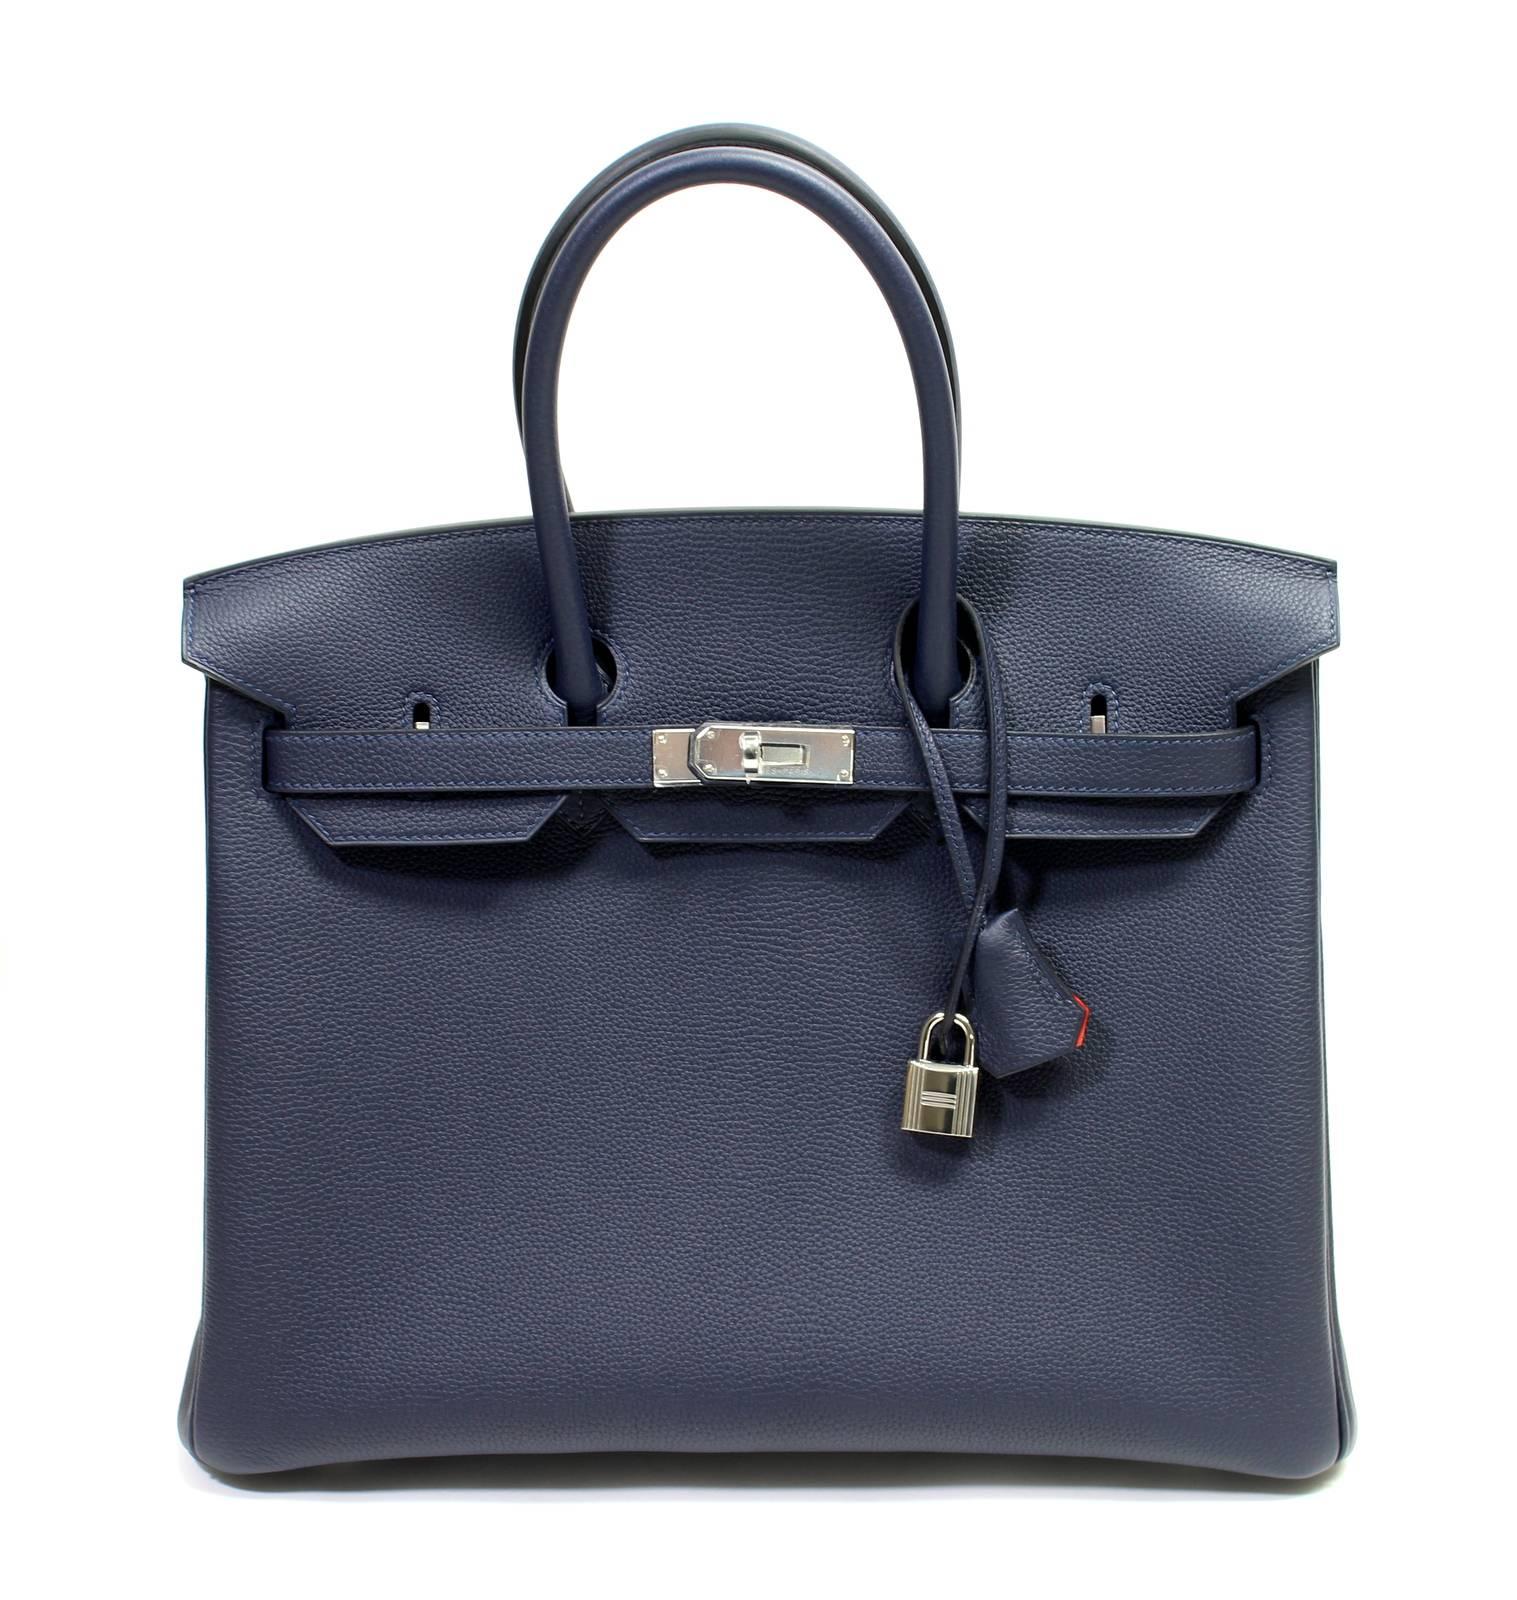 Hermès Togo Verso Birkin Bag- Bleu Nuit and Orange Poppy 35 cm
 Store Fresh; Pristine with plastic intact on all hardware.  
Verso is the newest version of the Birkin released in 2017.  Two tone; a contrasting interior color adds a unique twist to